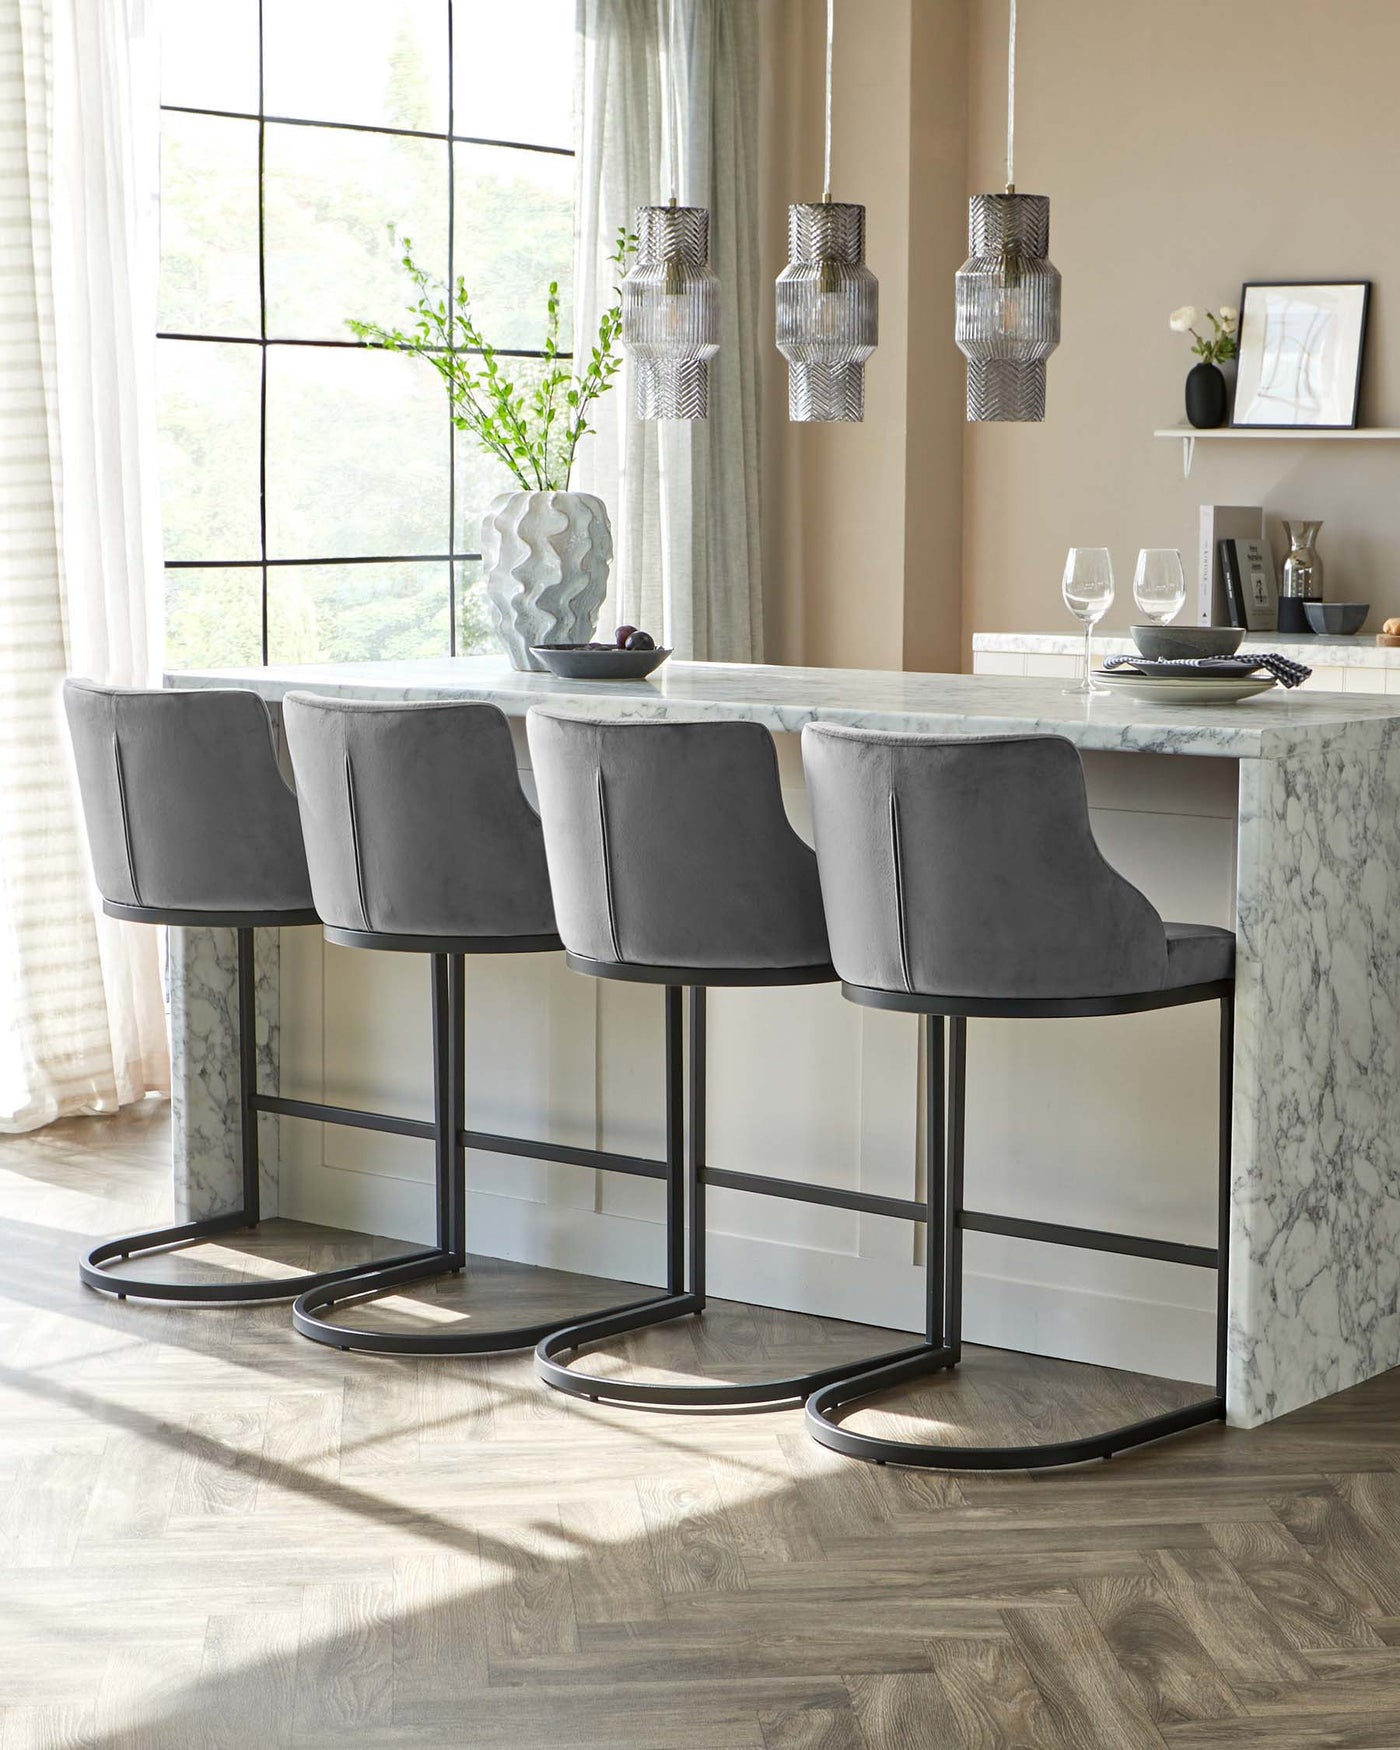 Elegant grey upholstered bar stools with backrests and sleek black metal legs, paired with a marble kitchen island.